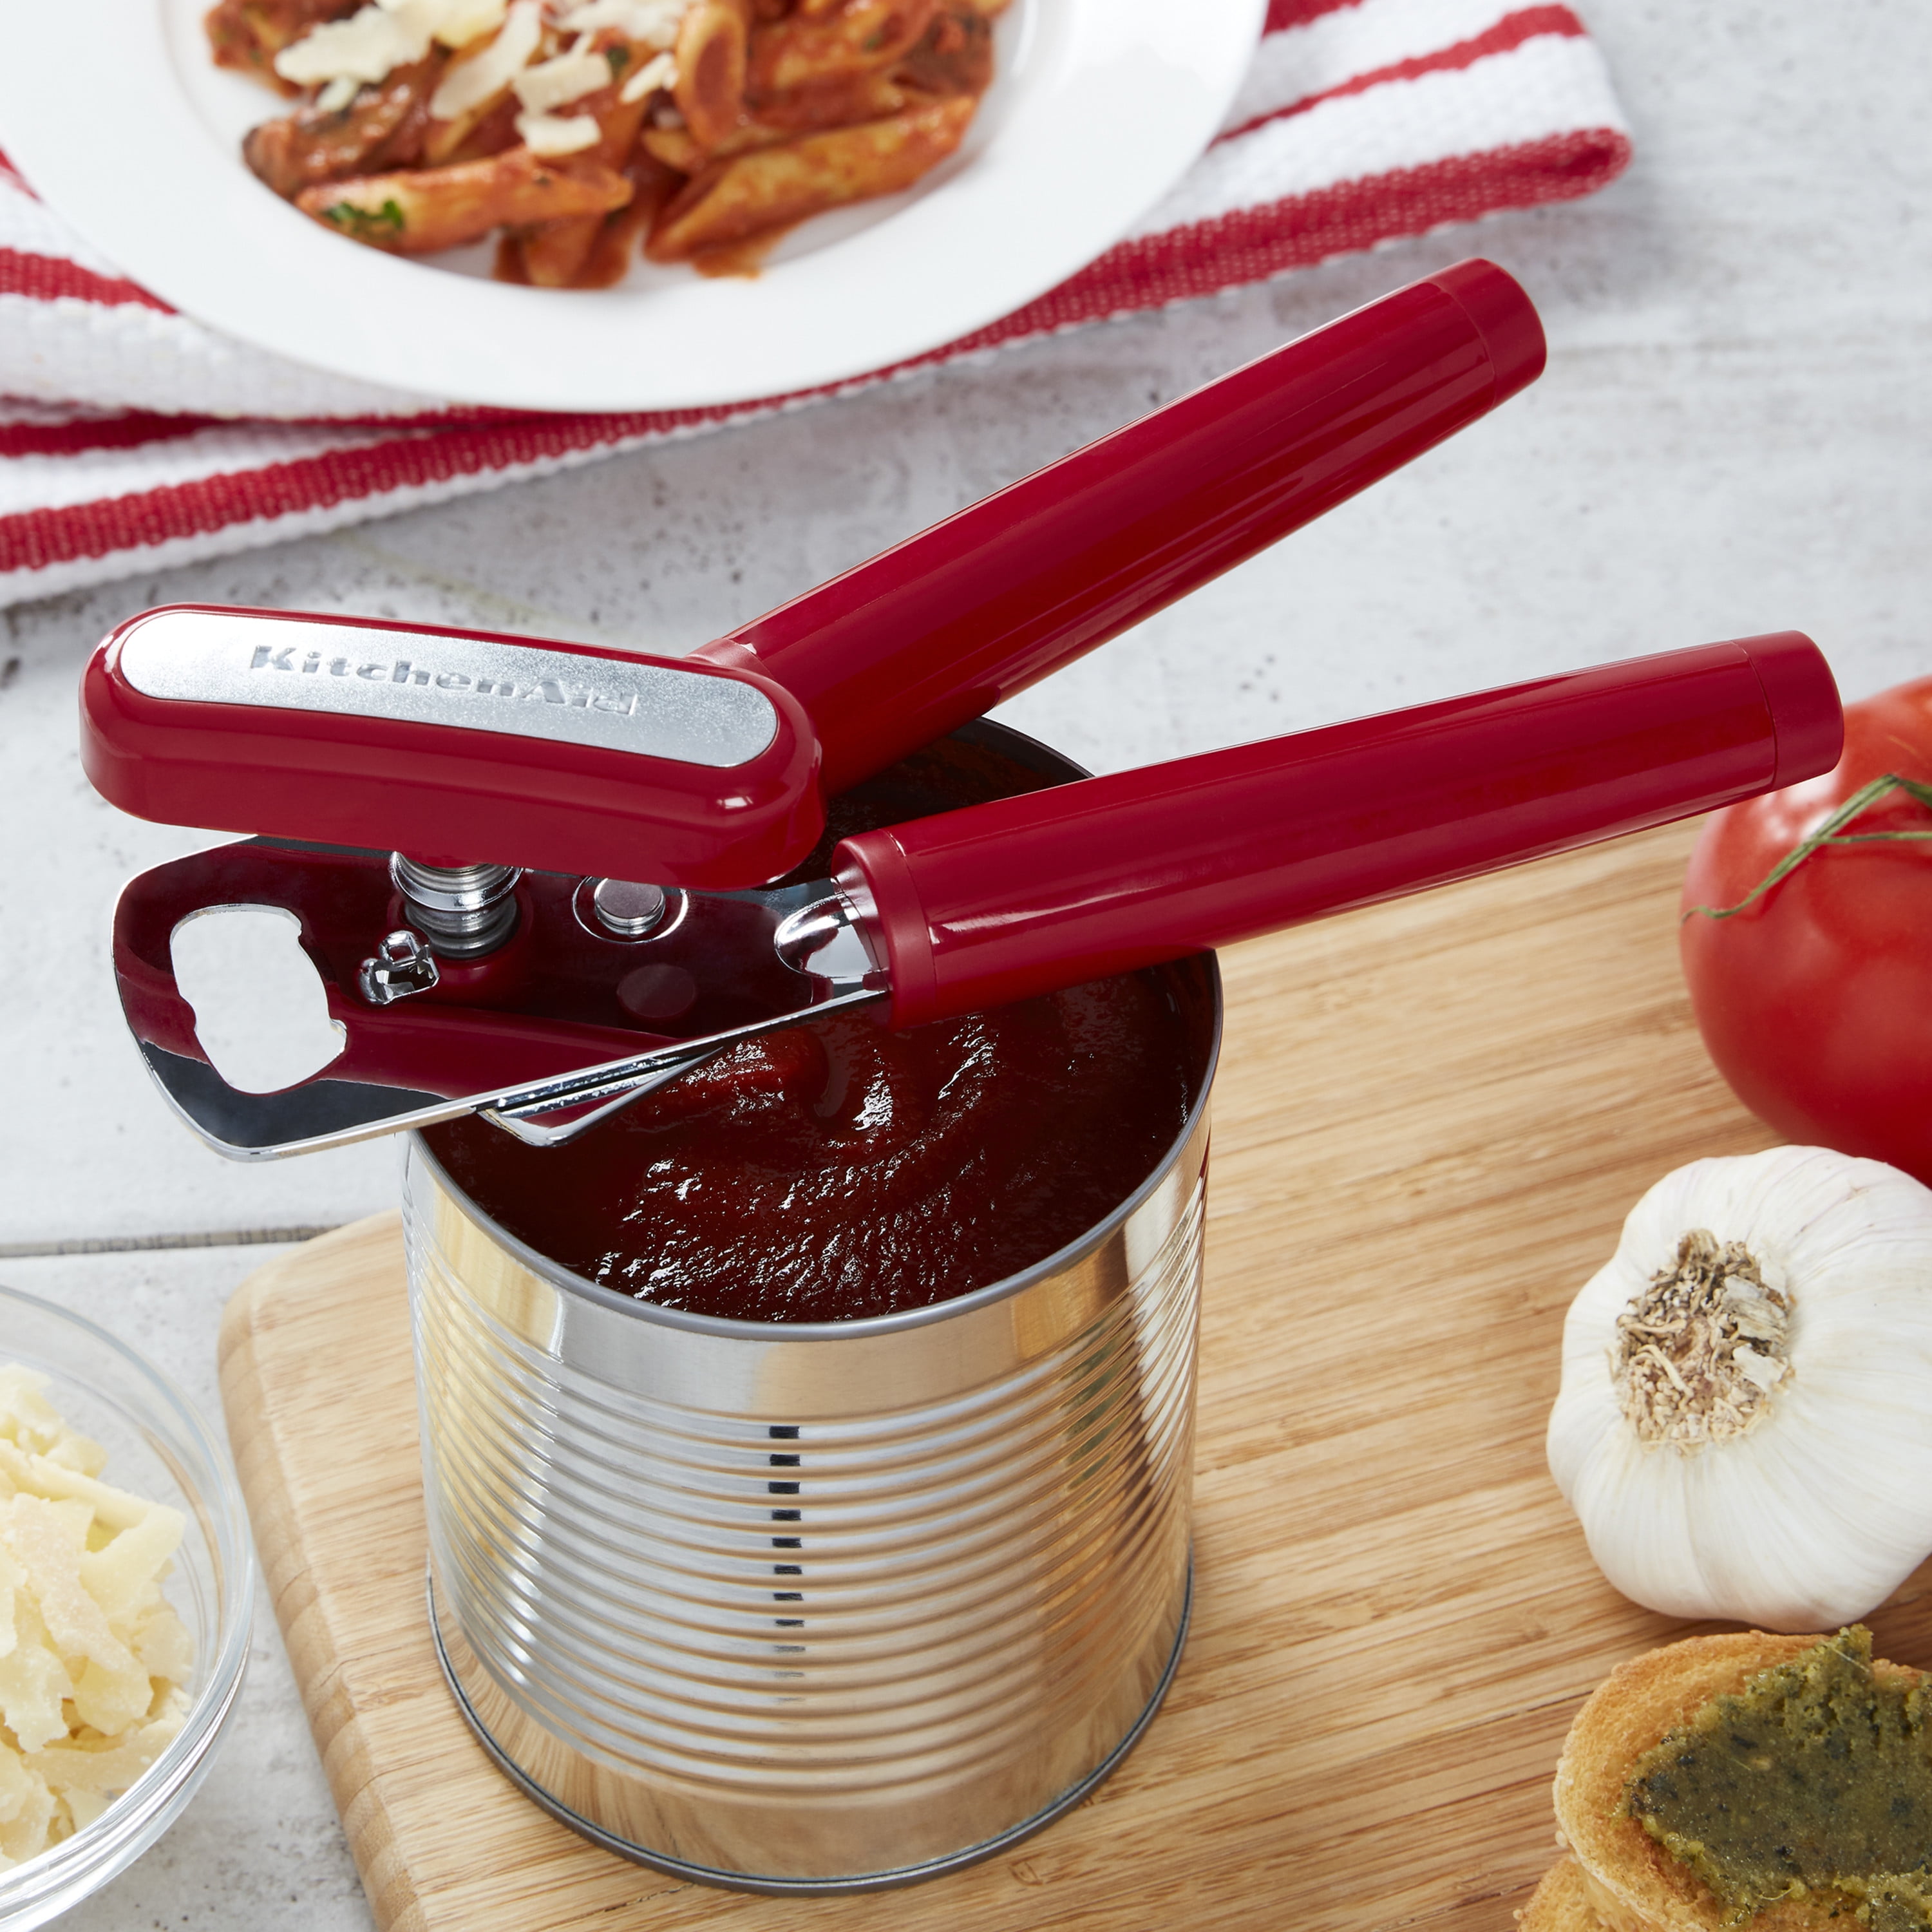 KitchenAid Classic Multifunction Can Opener/Bottle Opener Review 